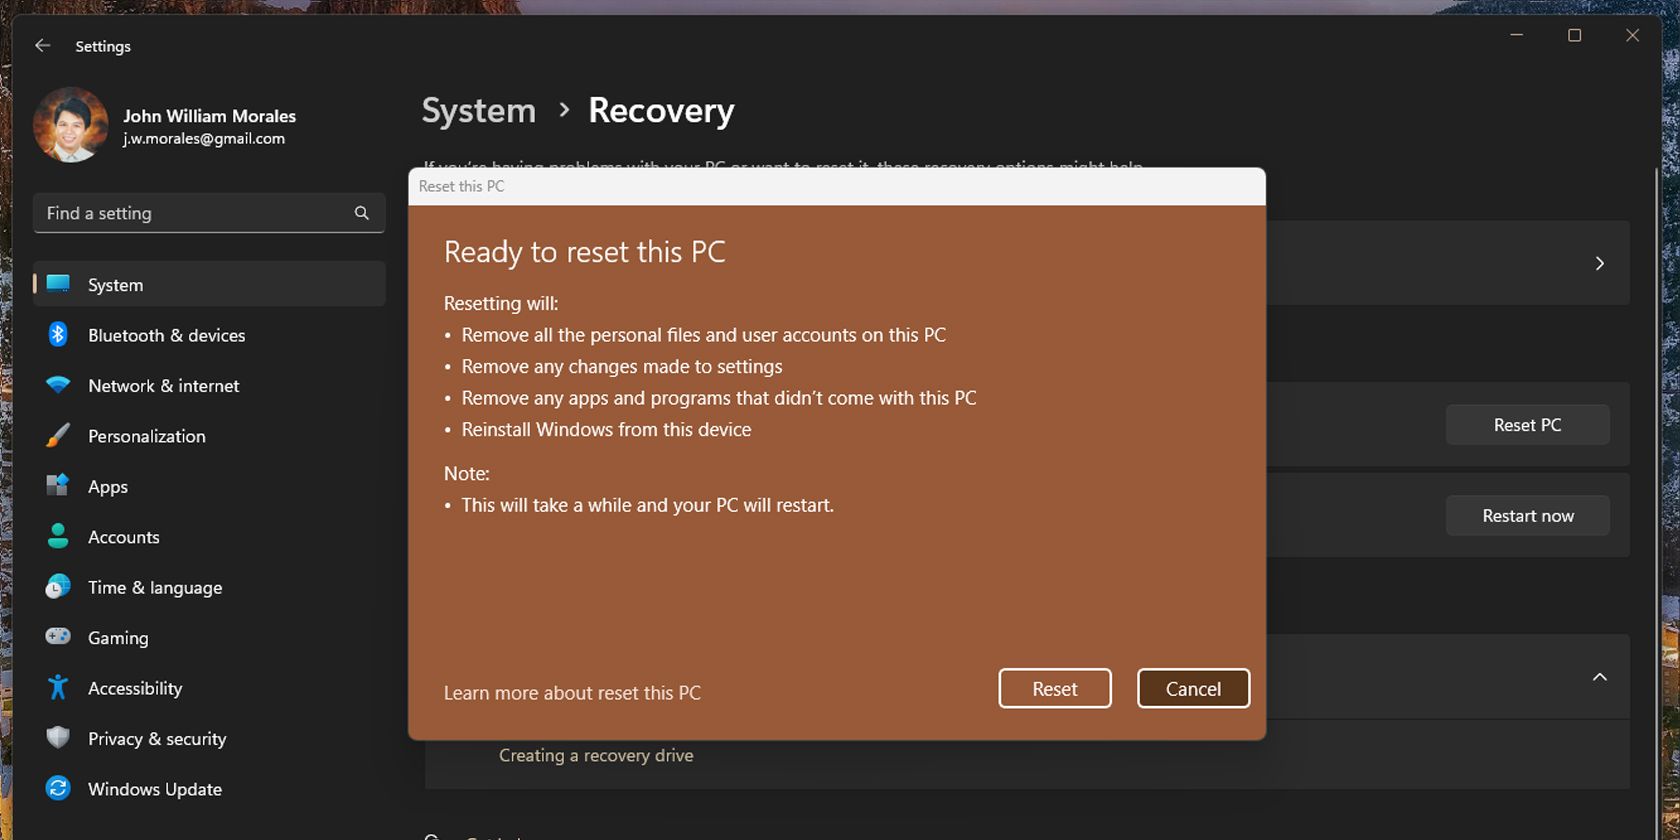 Ready to reset this PC window